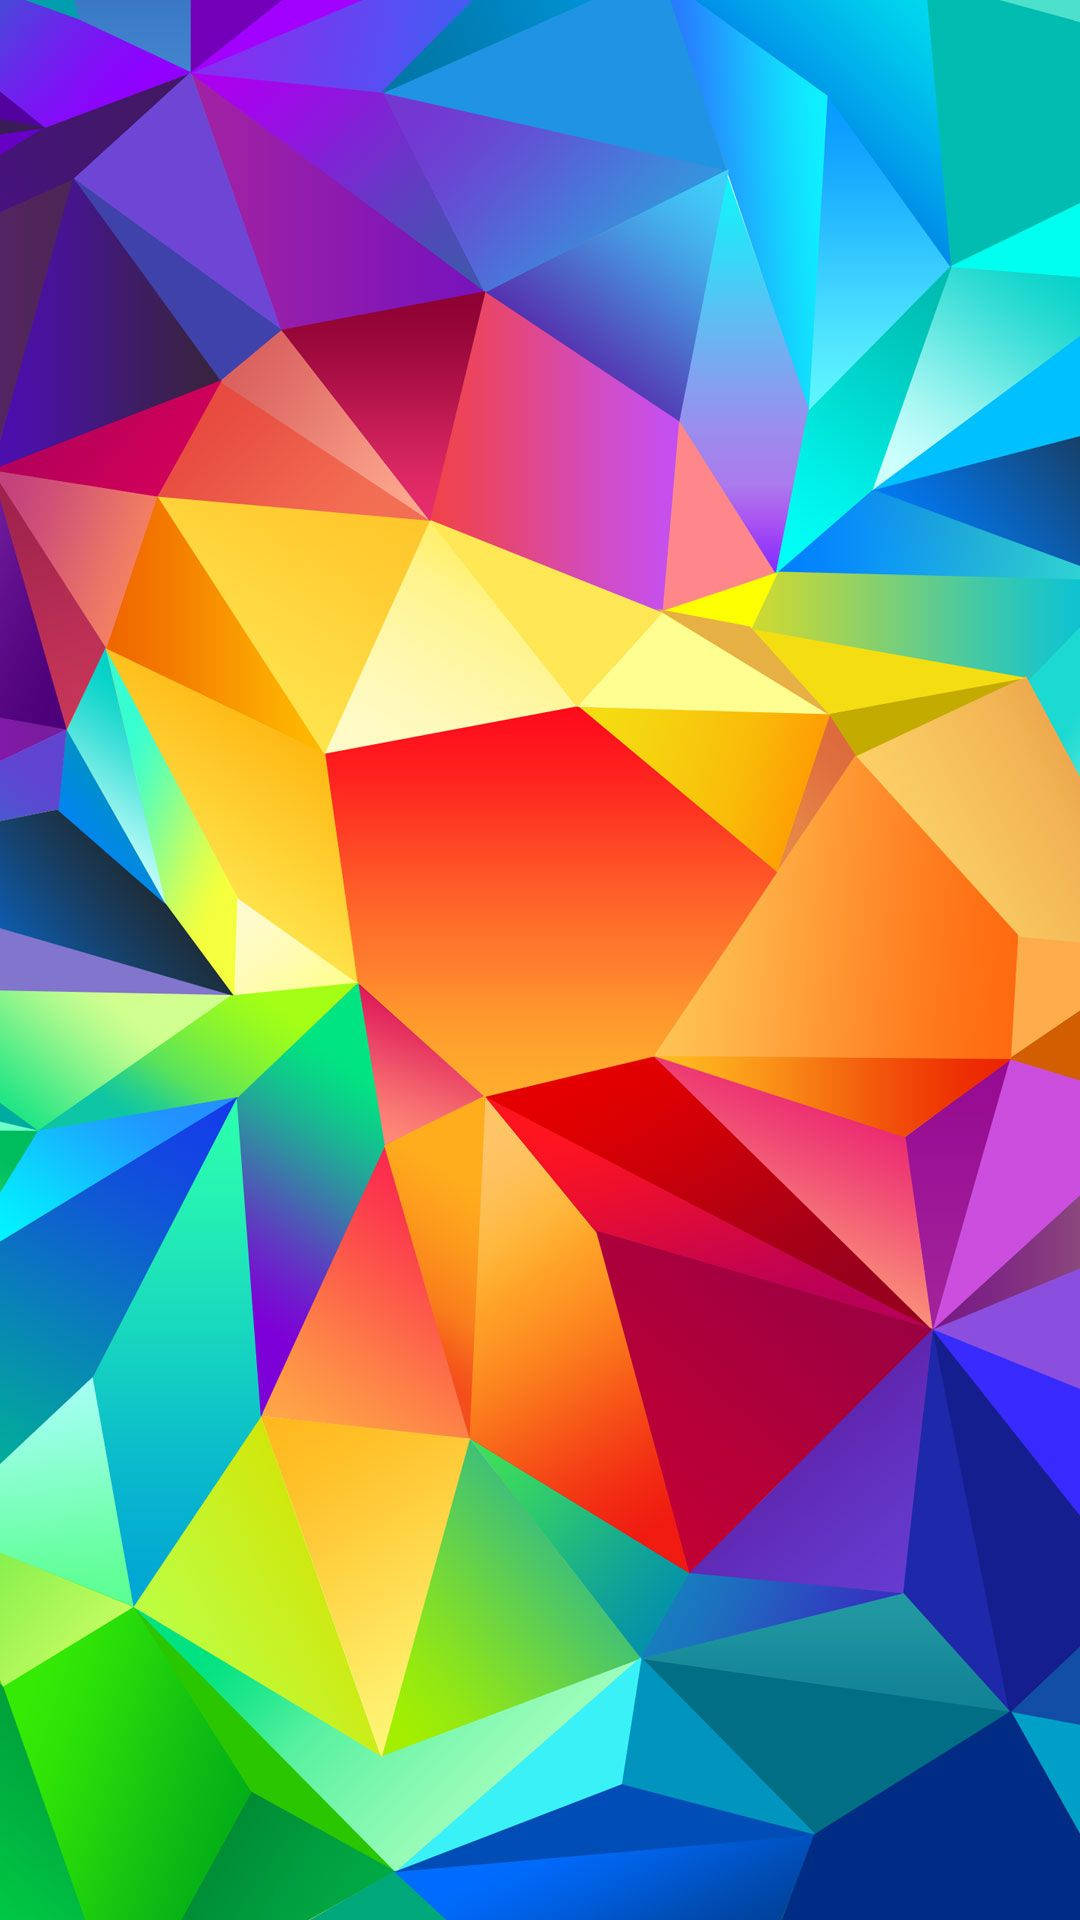 Geometric Art From Another Dimension Wallpaper